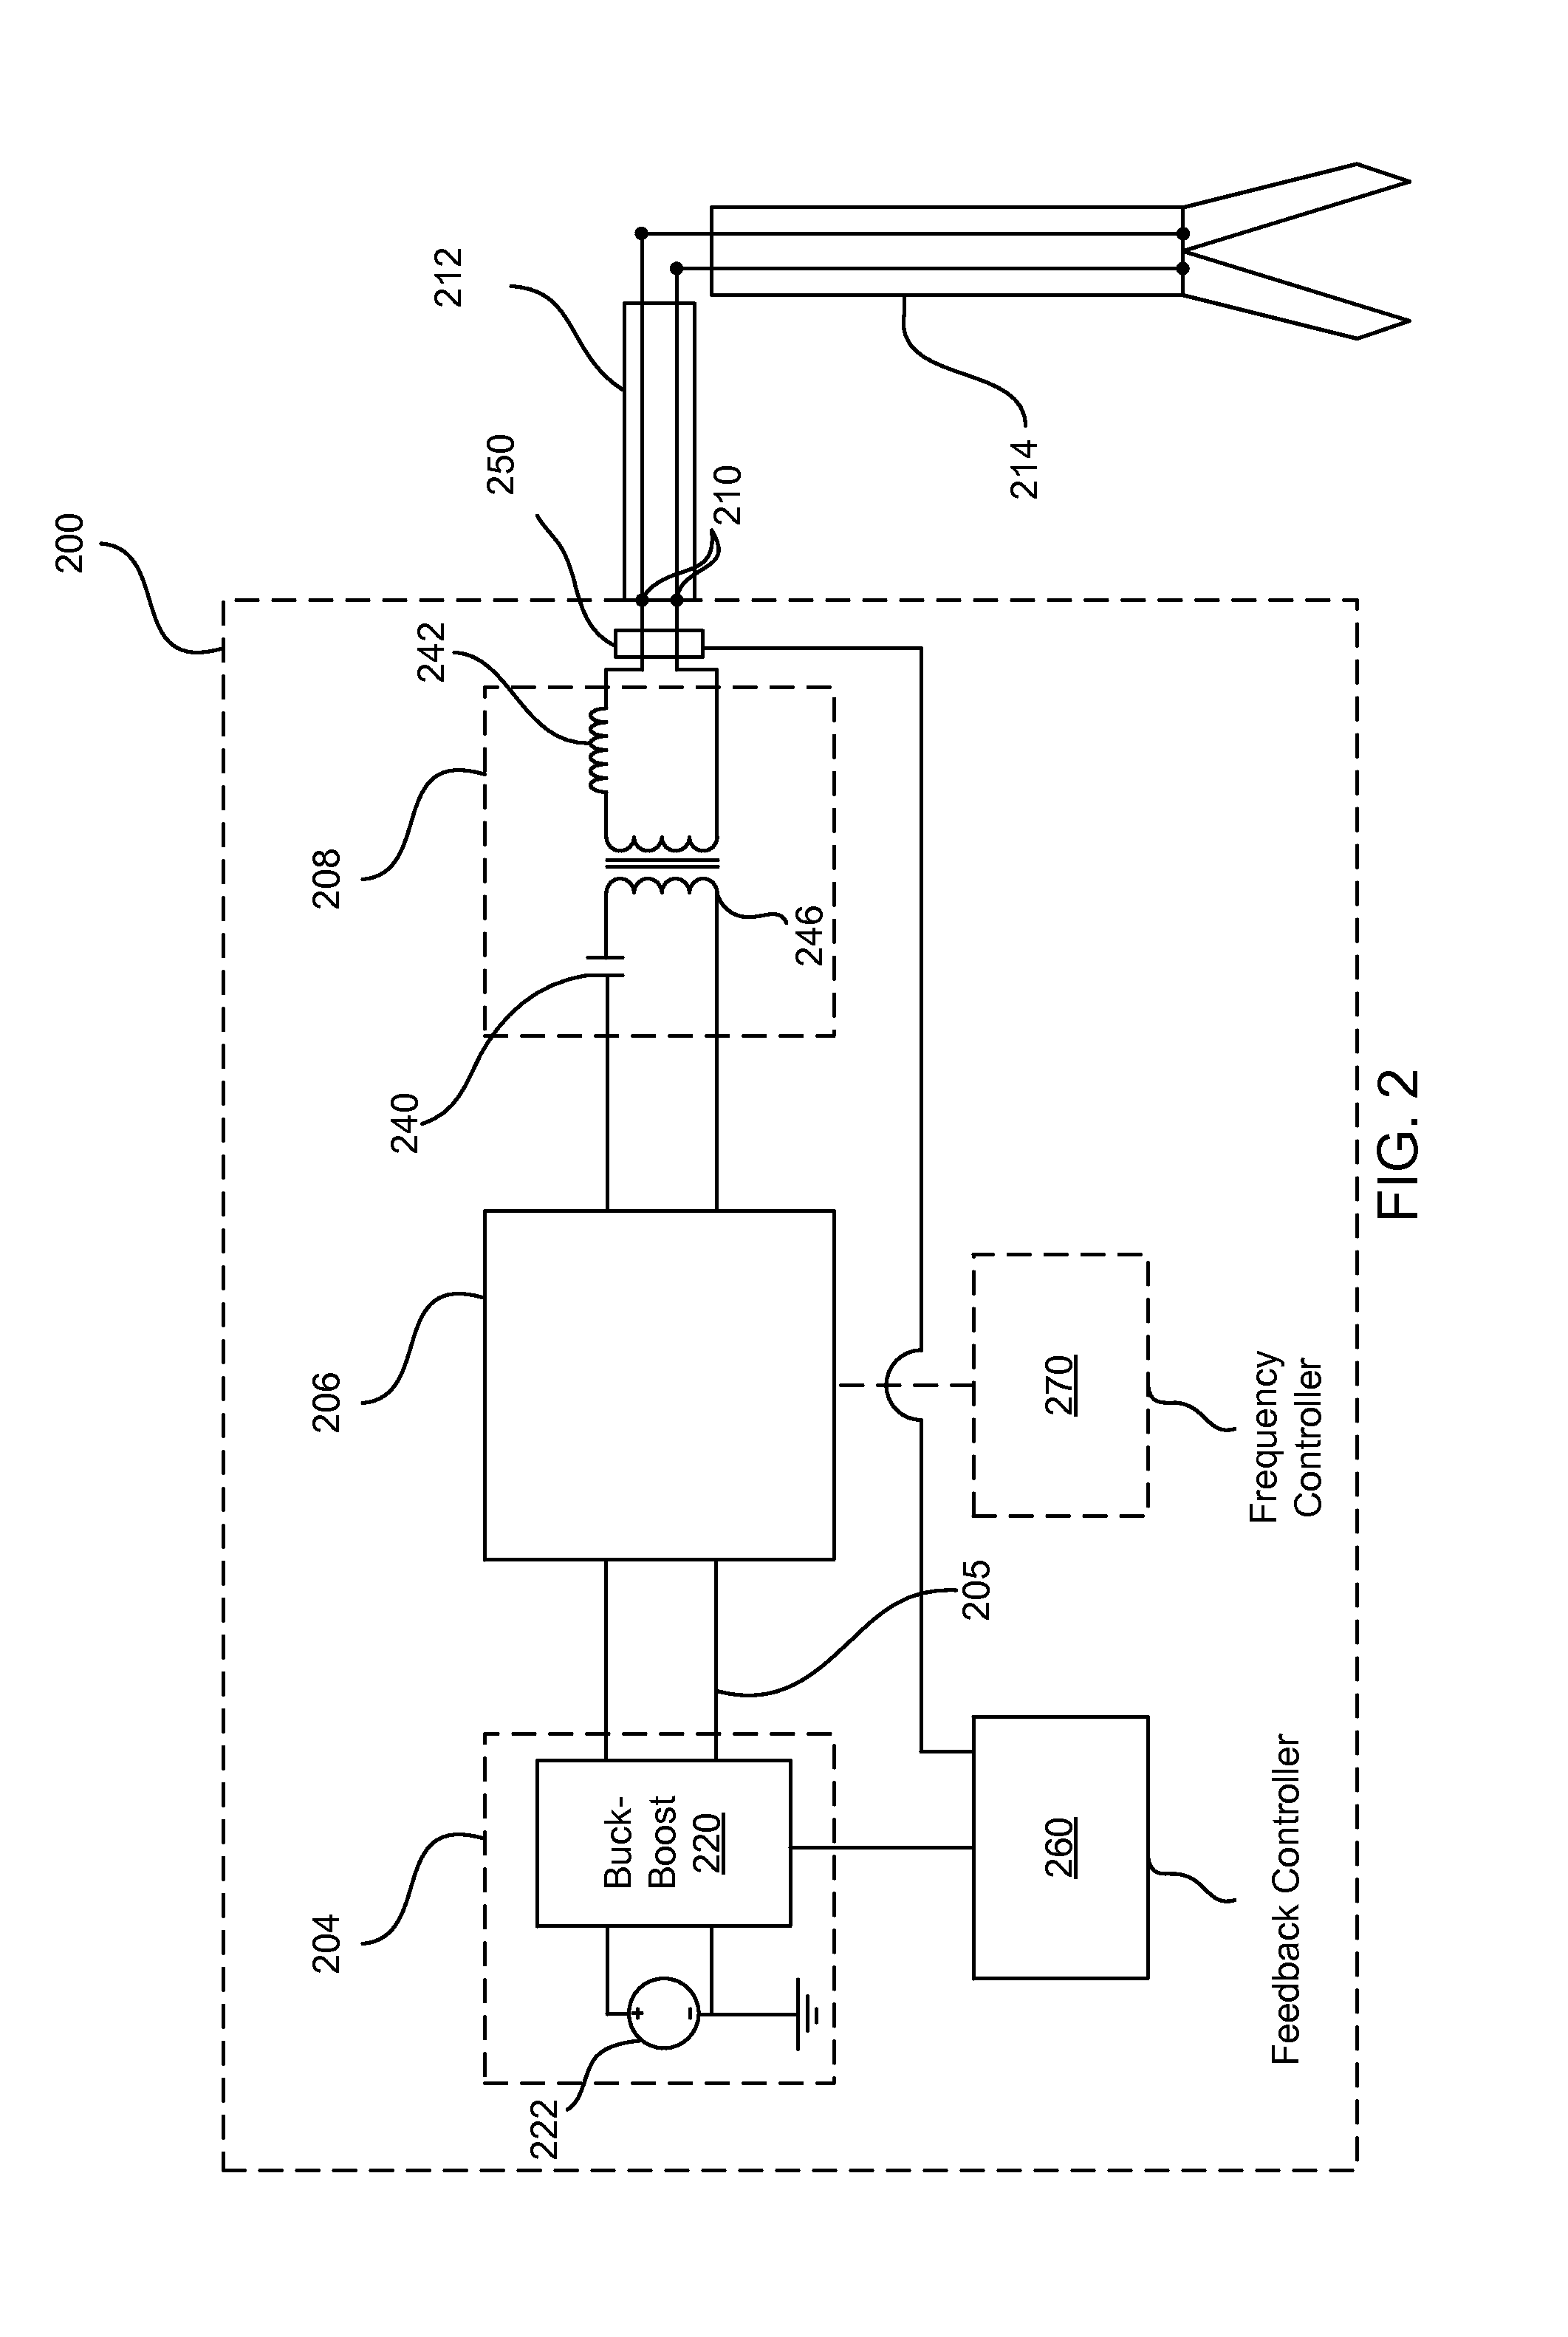 RF generator system for surgical vessel sealing